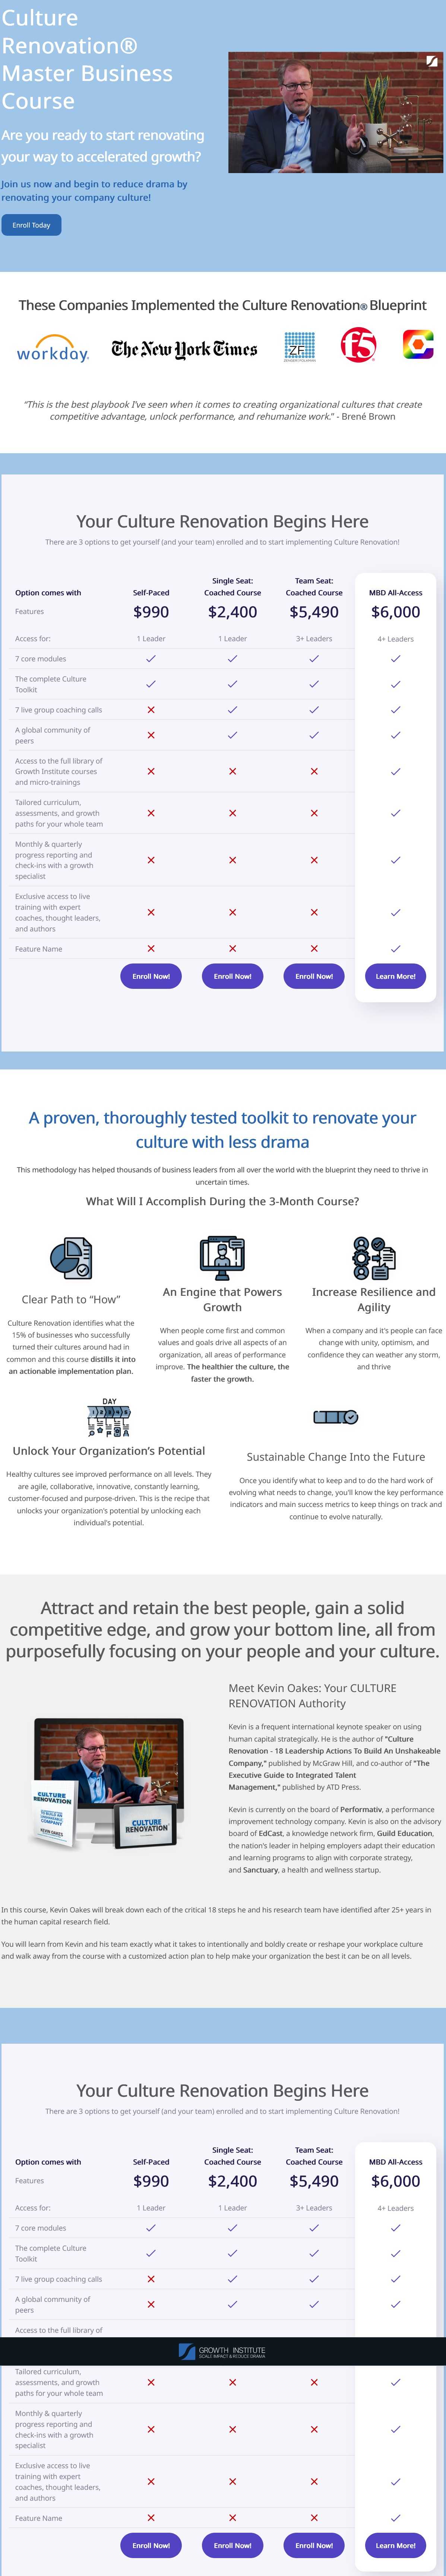 kevin-oakes-culture-renovation-master-business-course-self-paced-1